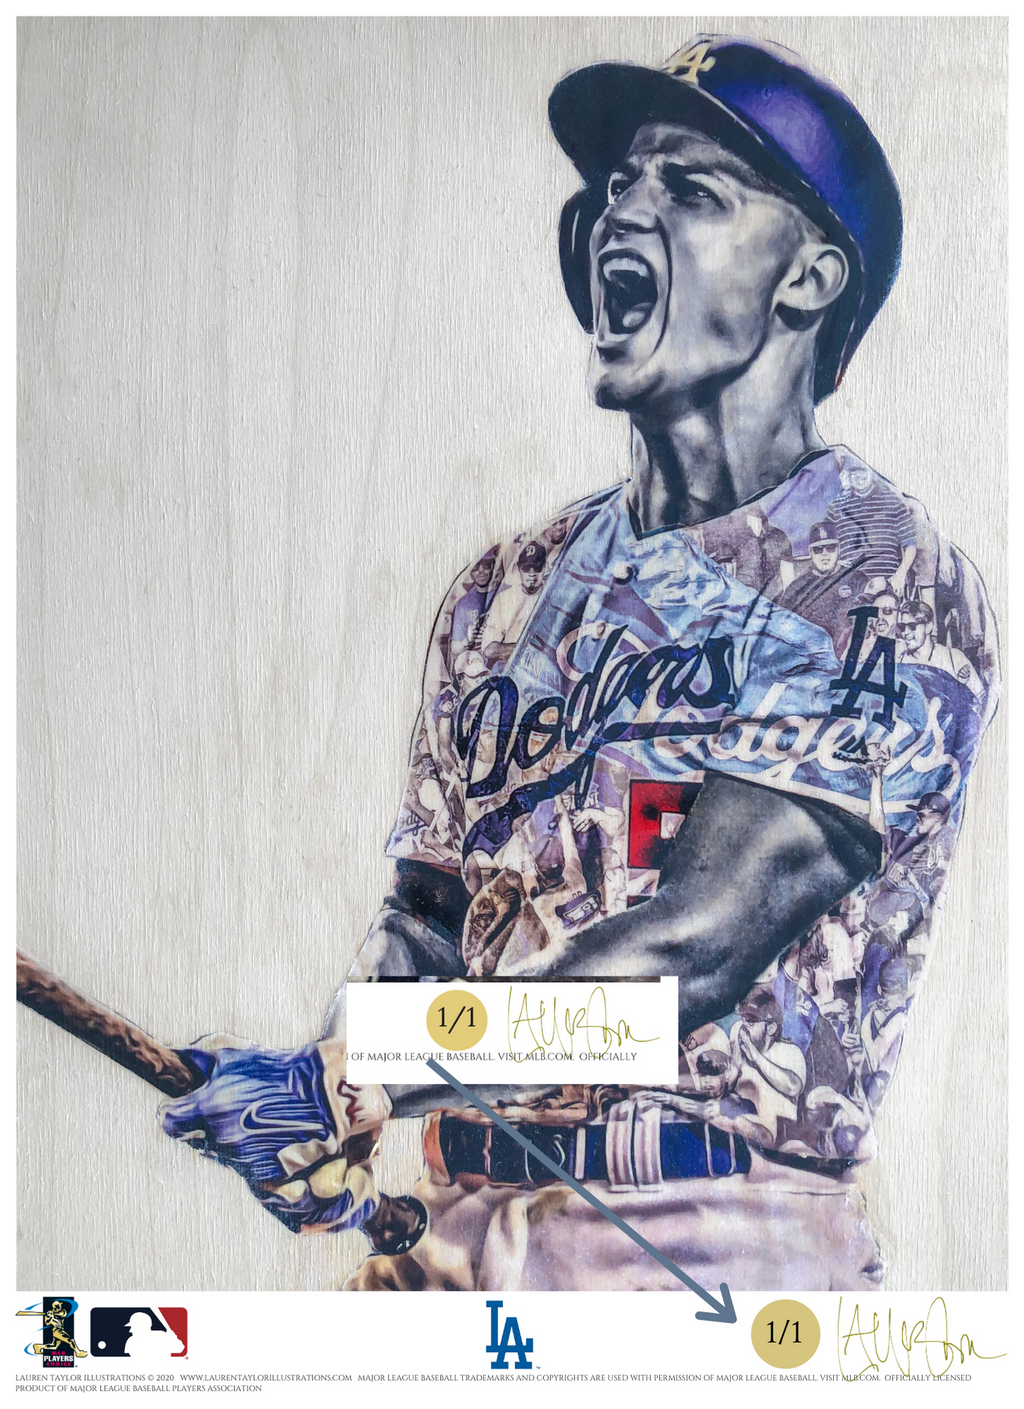 "C-Seag" (Corey Seager) Los Angeles Dodgers - Officially Licensed MLB Print - GOLD SIGNATURE LIMITED RELEASE /1